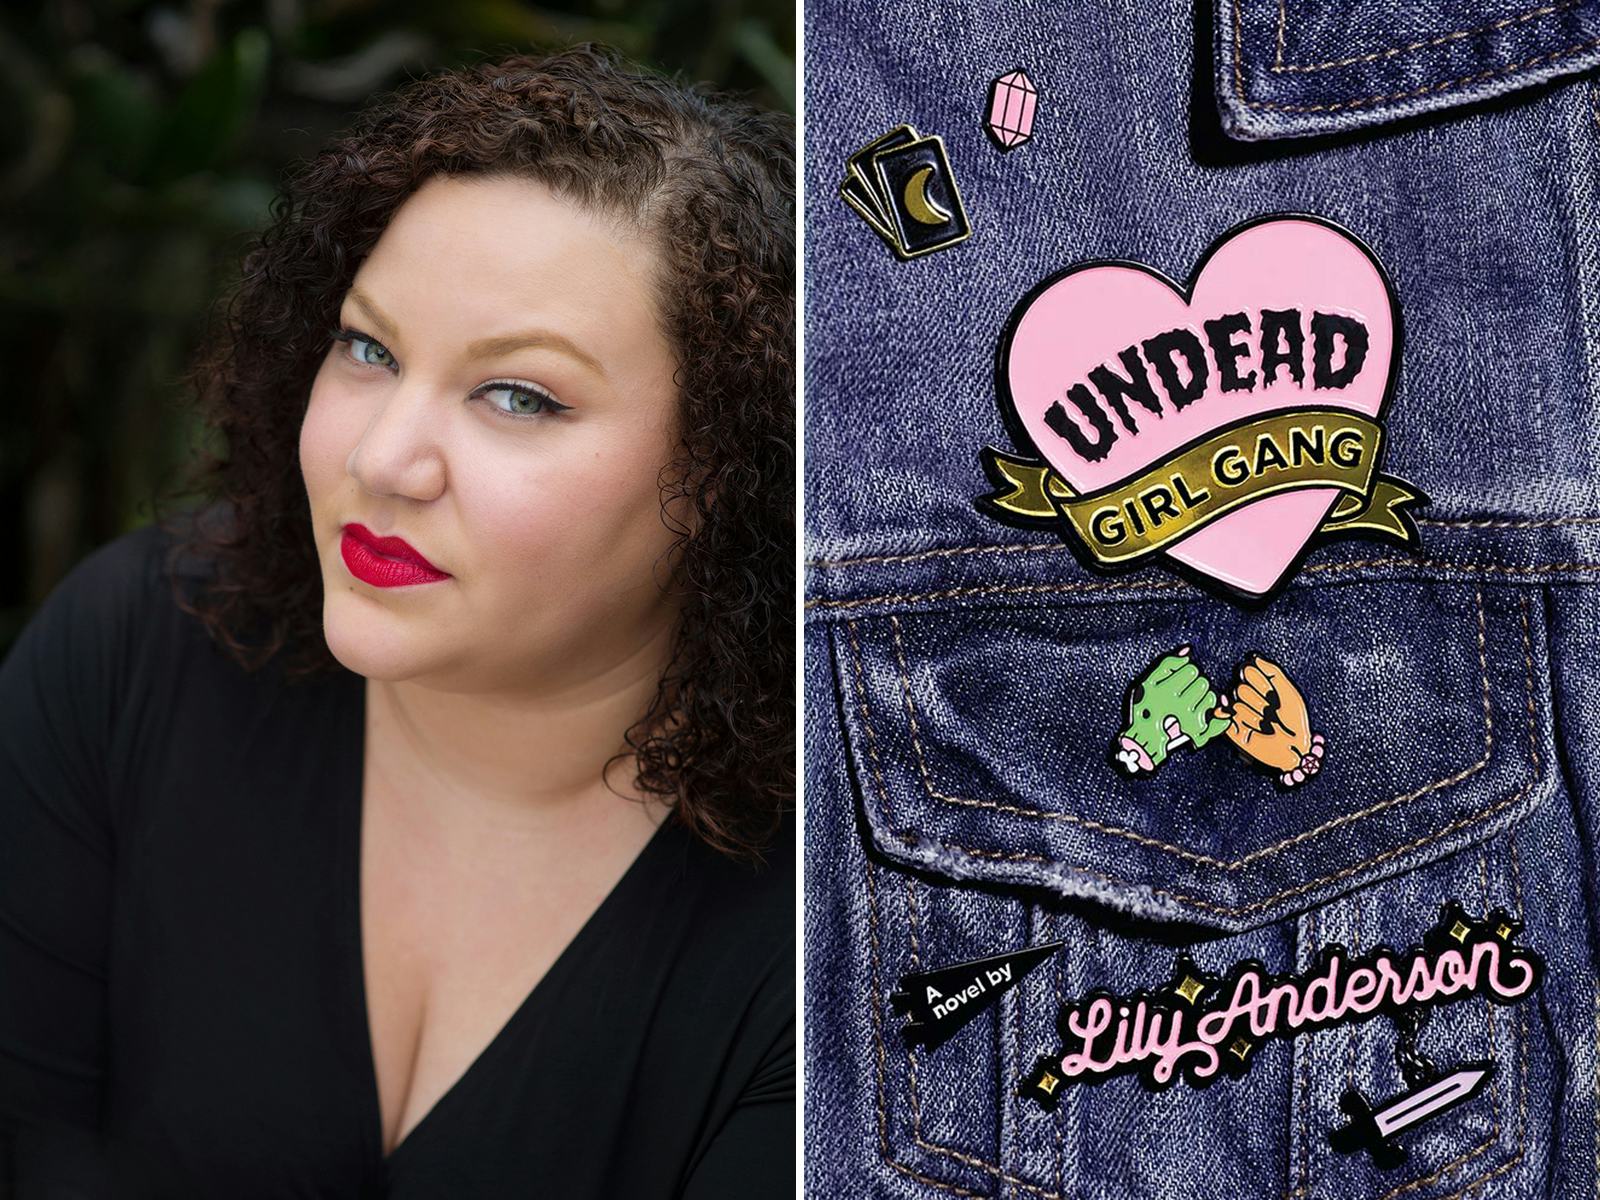 Lily Andersons Undead Girl Gang Is A Ya Mashup Of The Craft